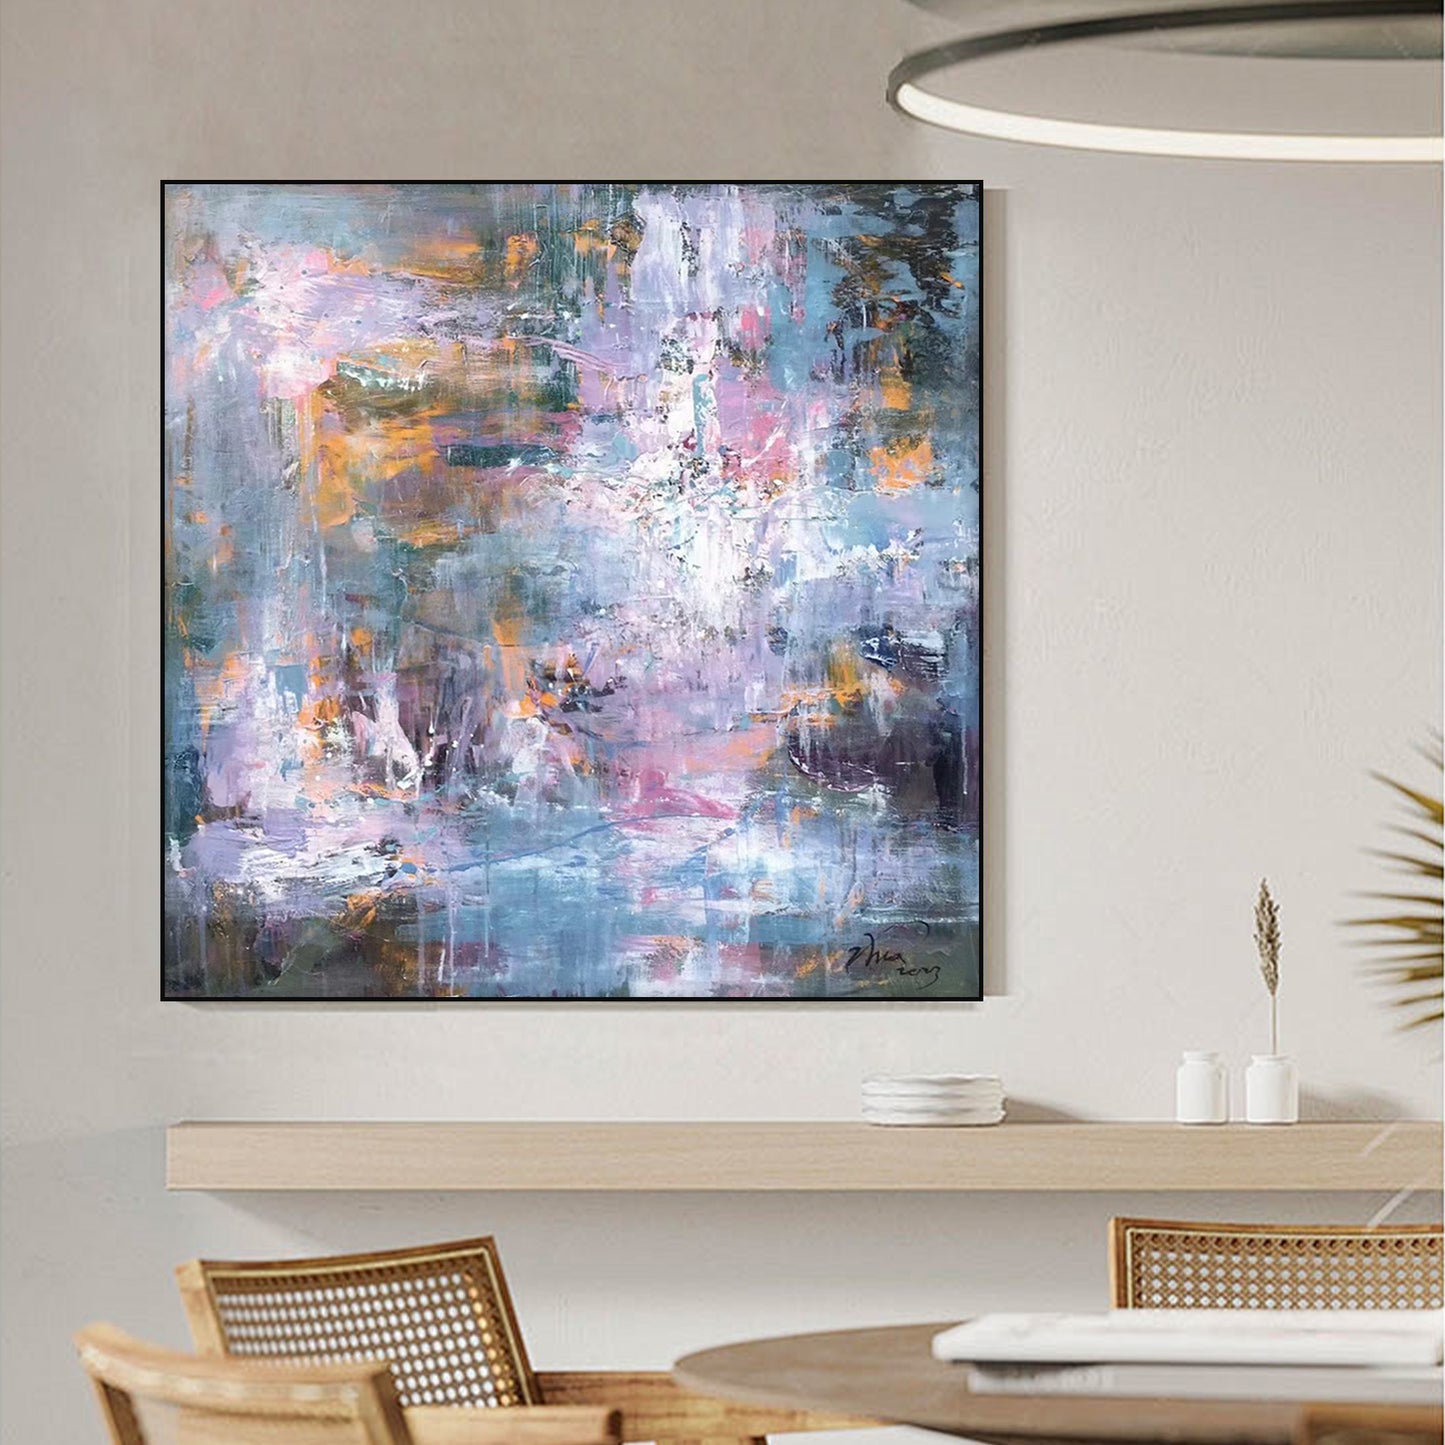 ABSTRACT PAINTING, CHAOS, HAND-PAINTED CANVAS